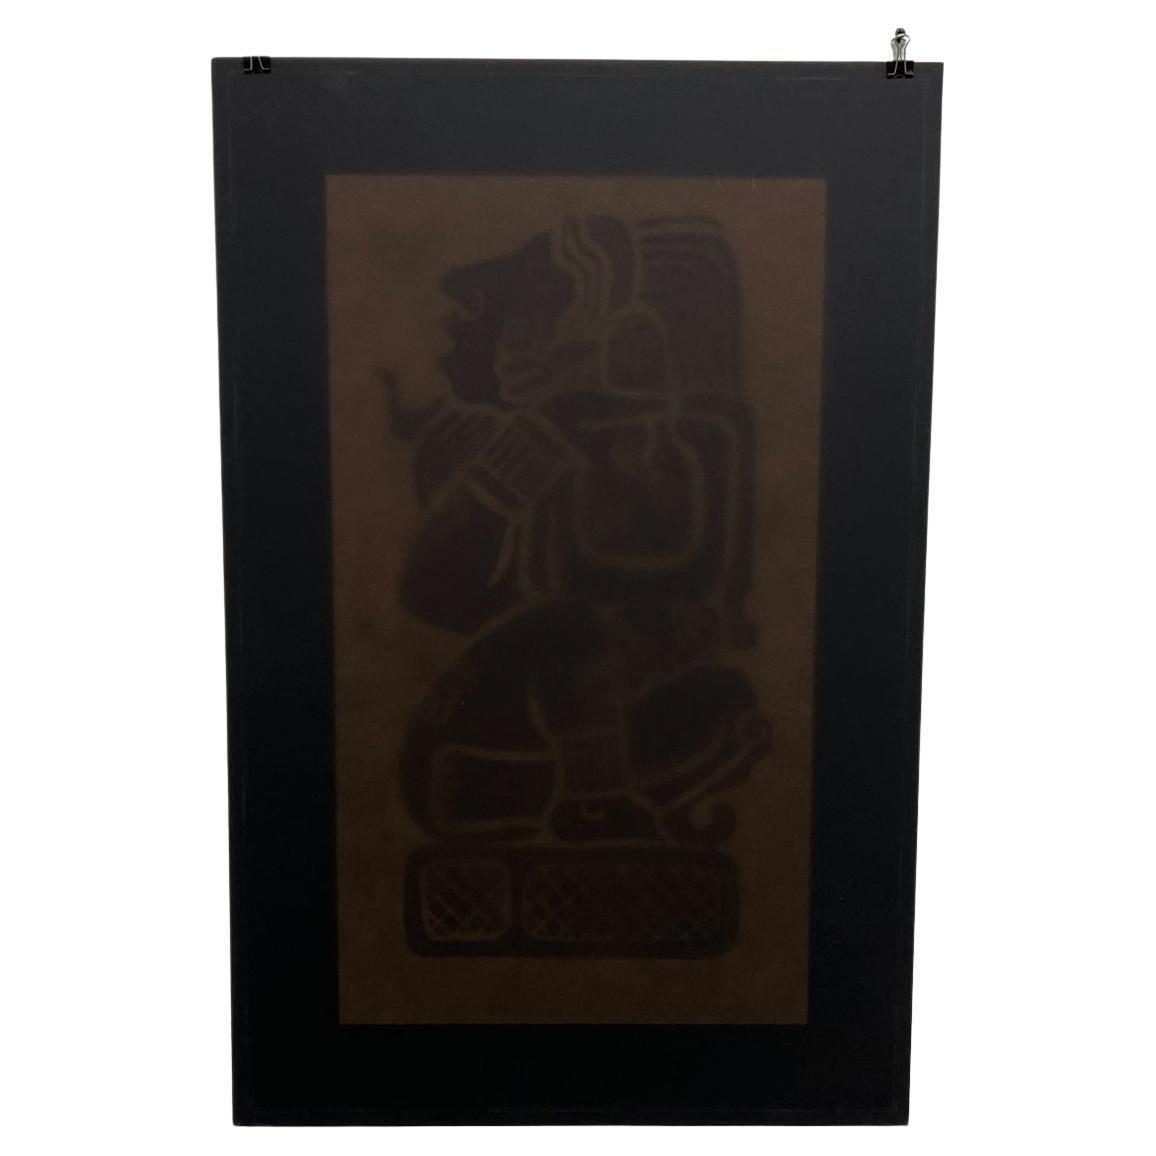 Intricate Mayan Revival Art Vintage Black Photograph Poster For Sale